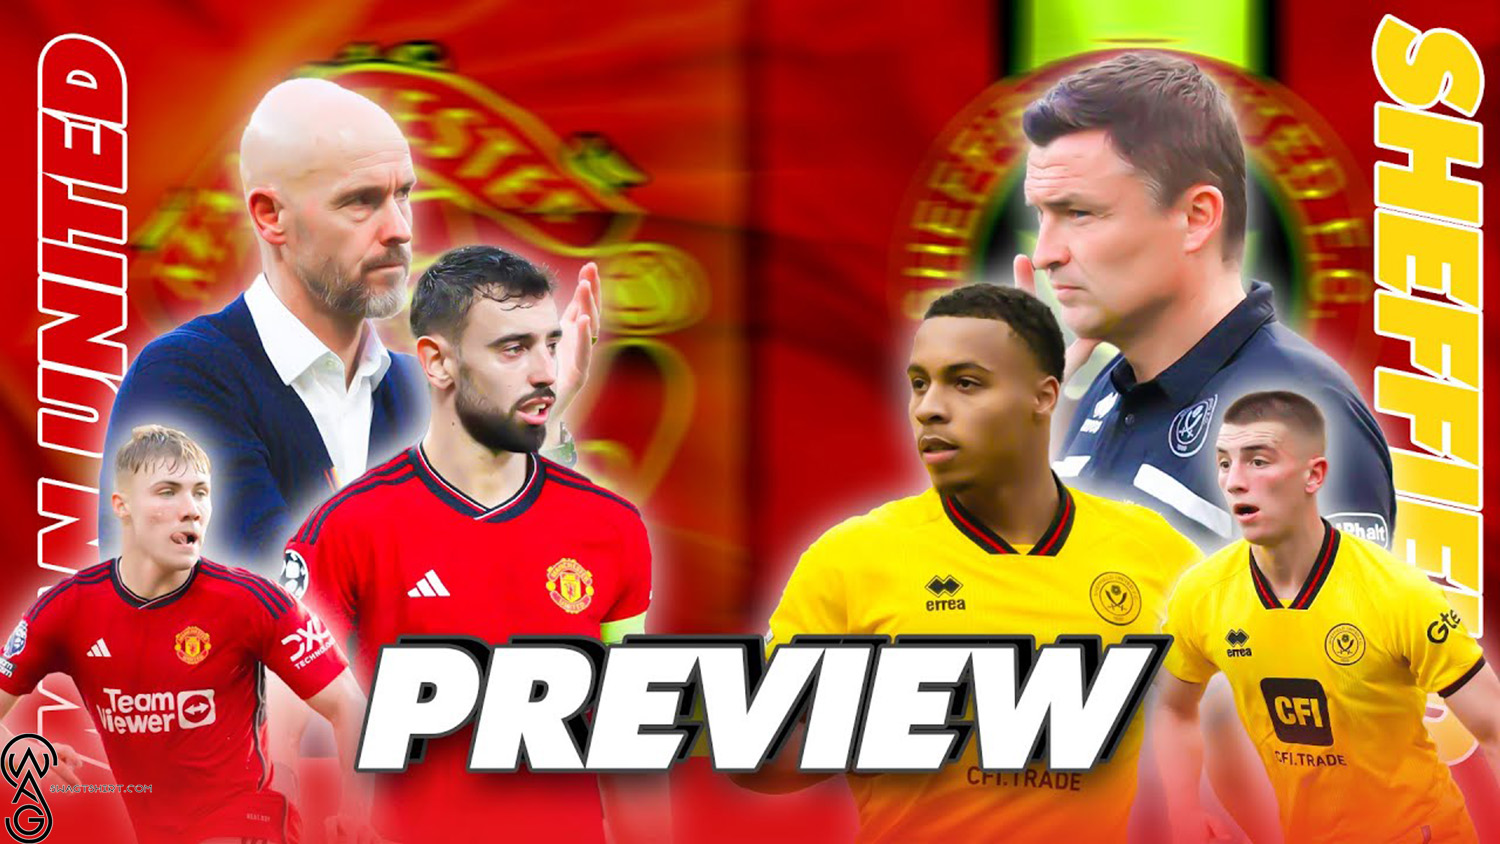 Premier League Spectacle Wolverhampton Wanderers vs. Manchester United – A High-Stakes Encounter at Molineux